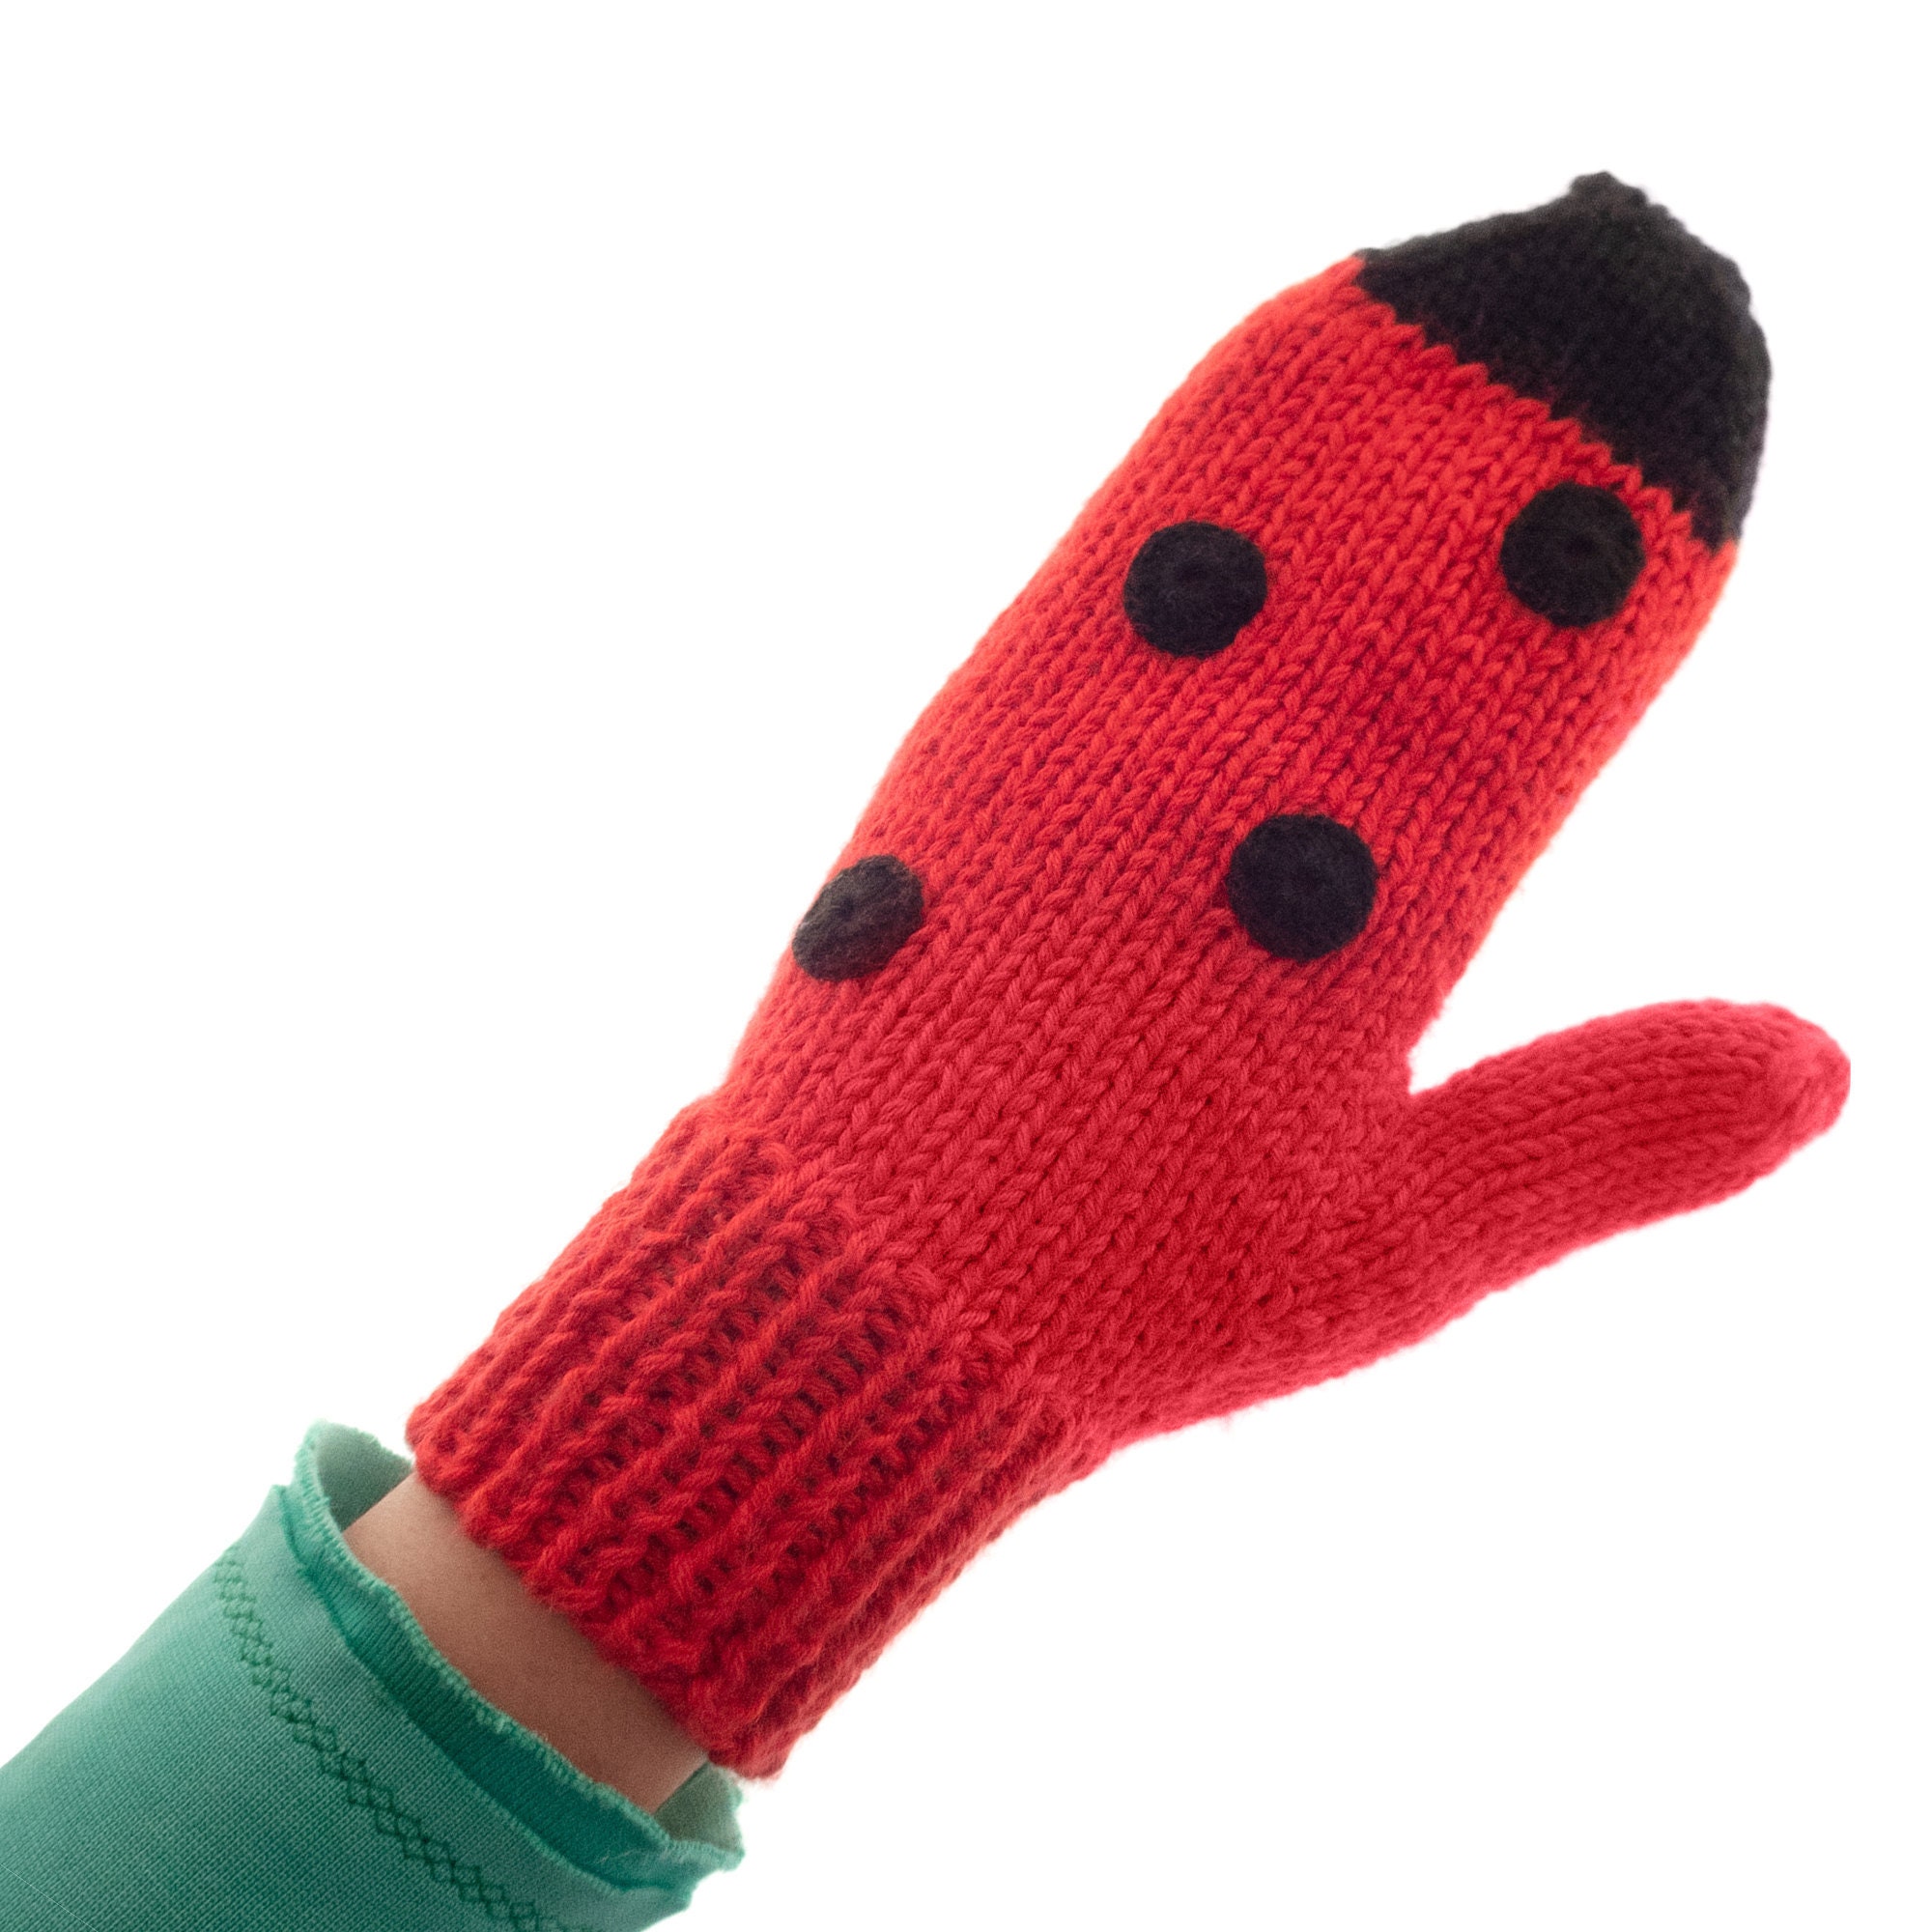 adults mittens, warm knitted winter mitts with ladybug theme